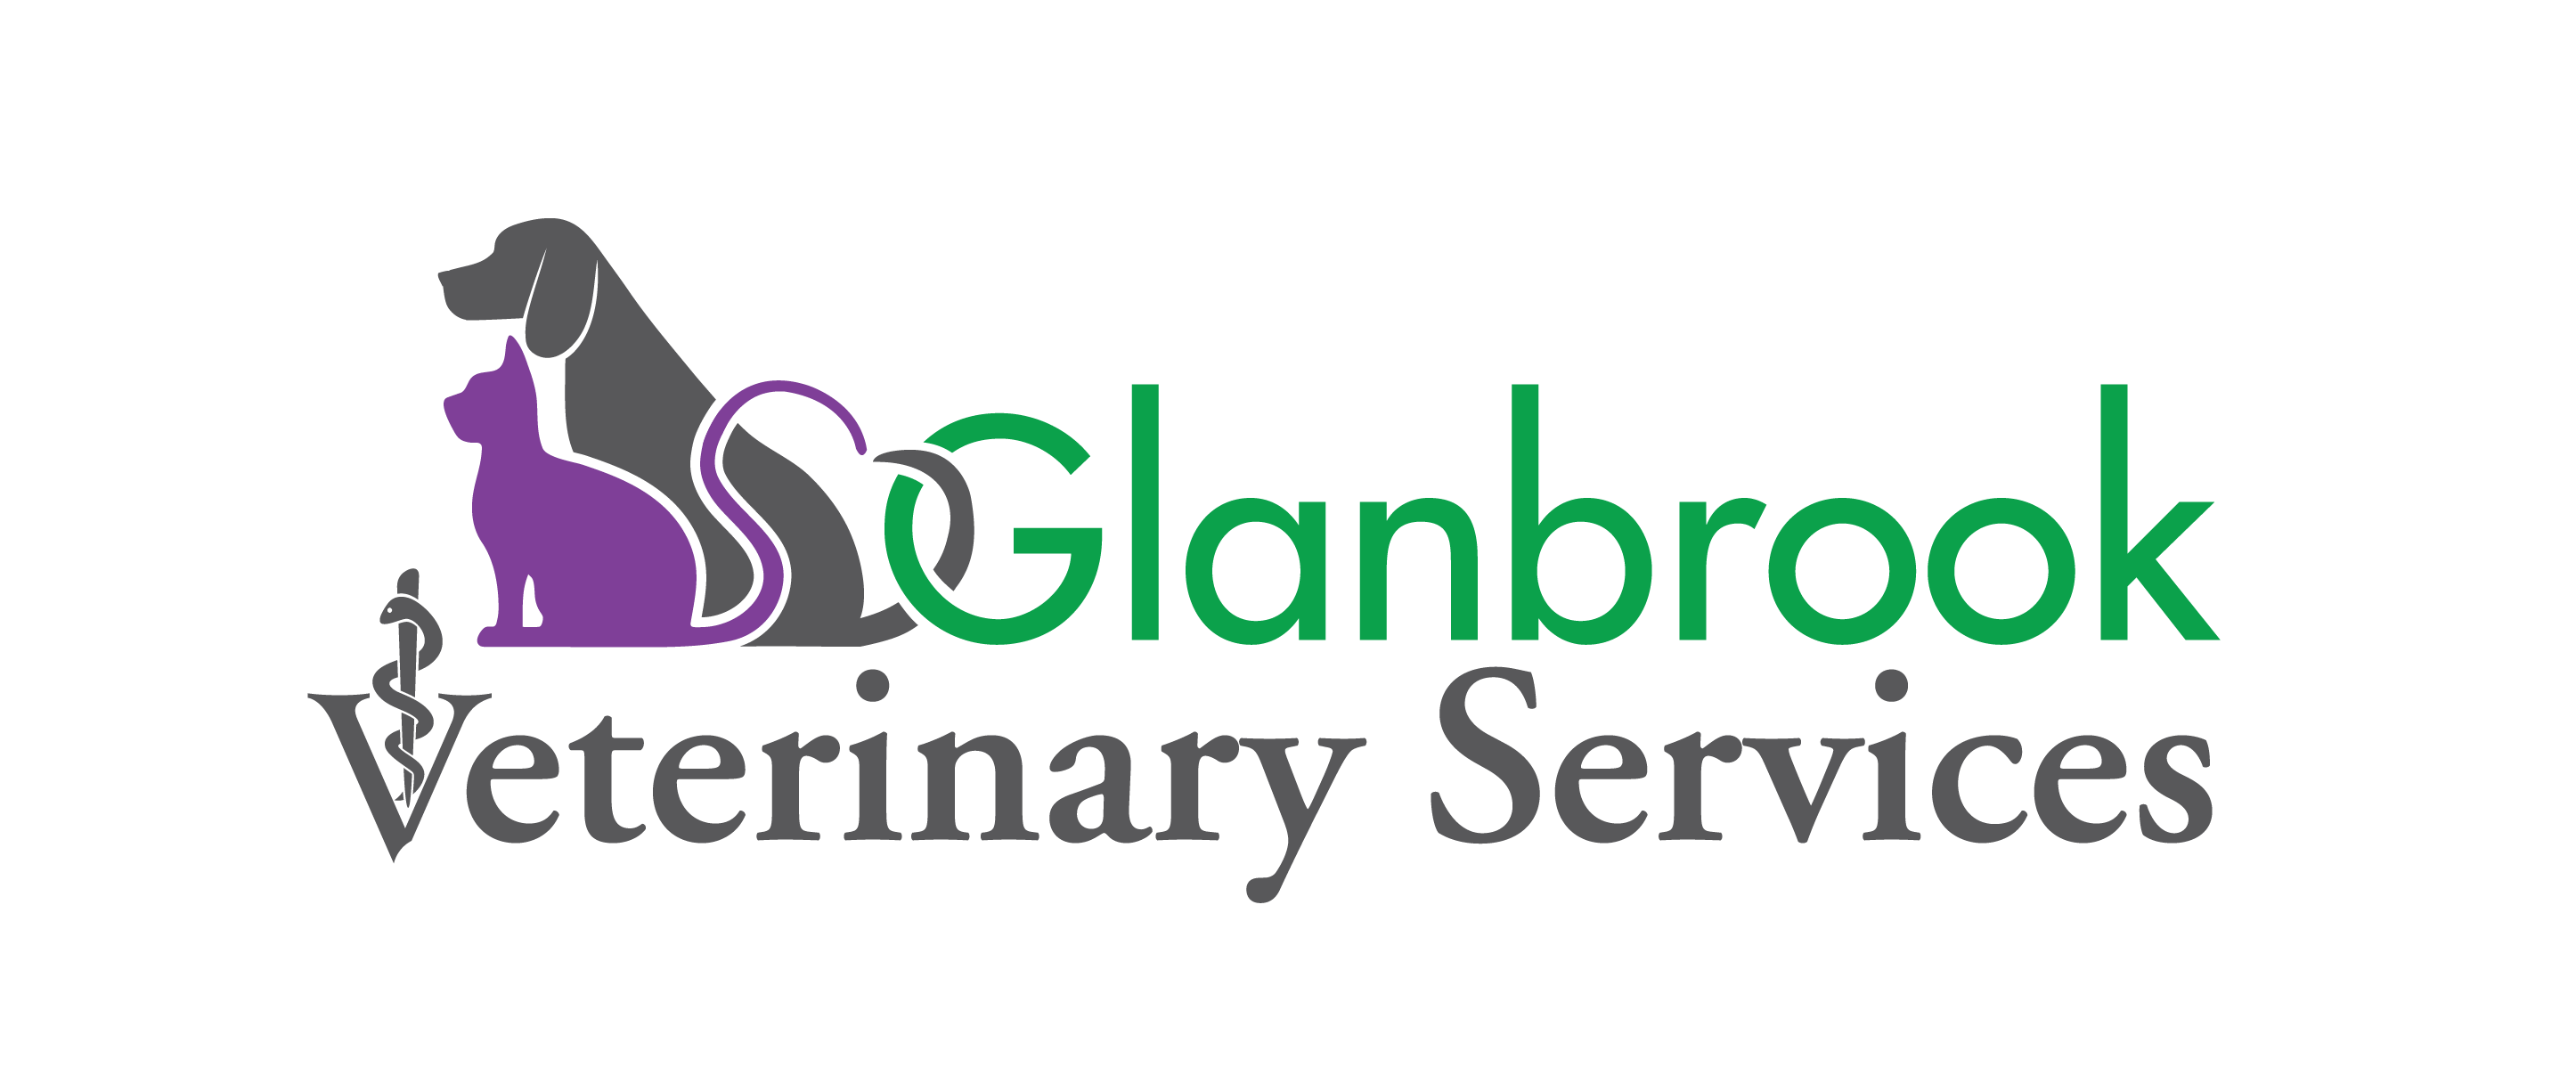 Thank You to Our Team Sponsor at Glanbrook Veterinary Services 